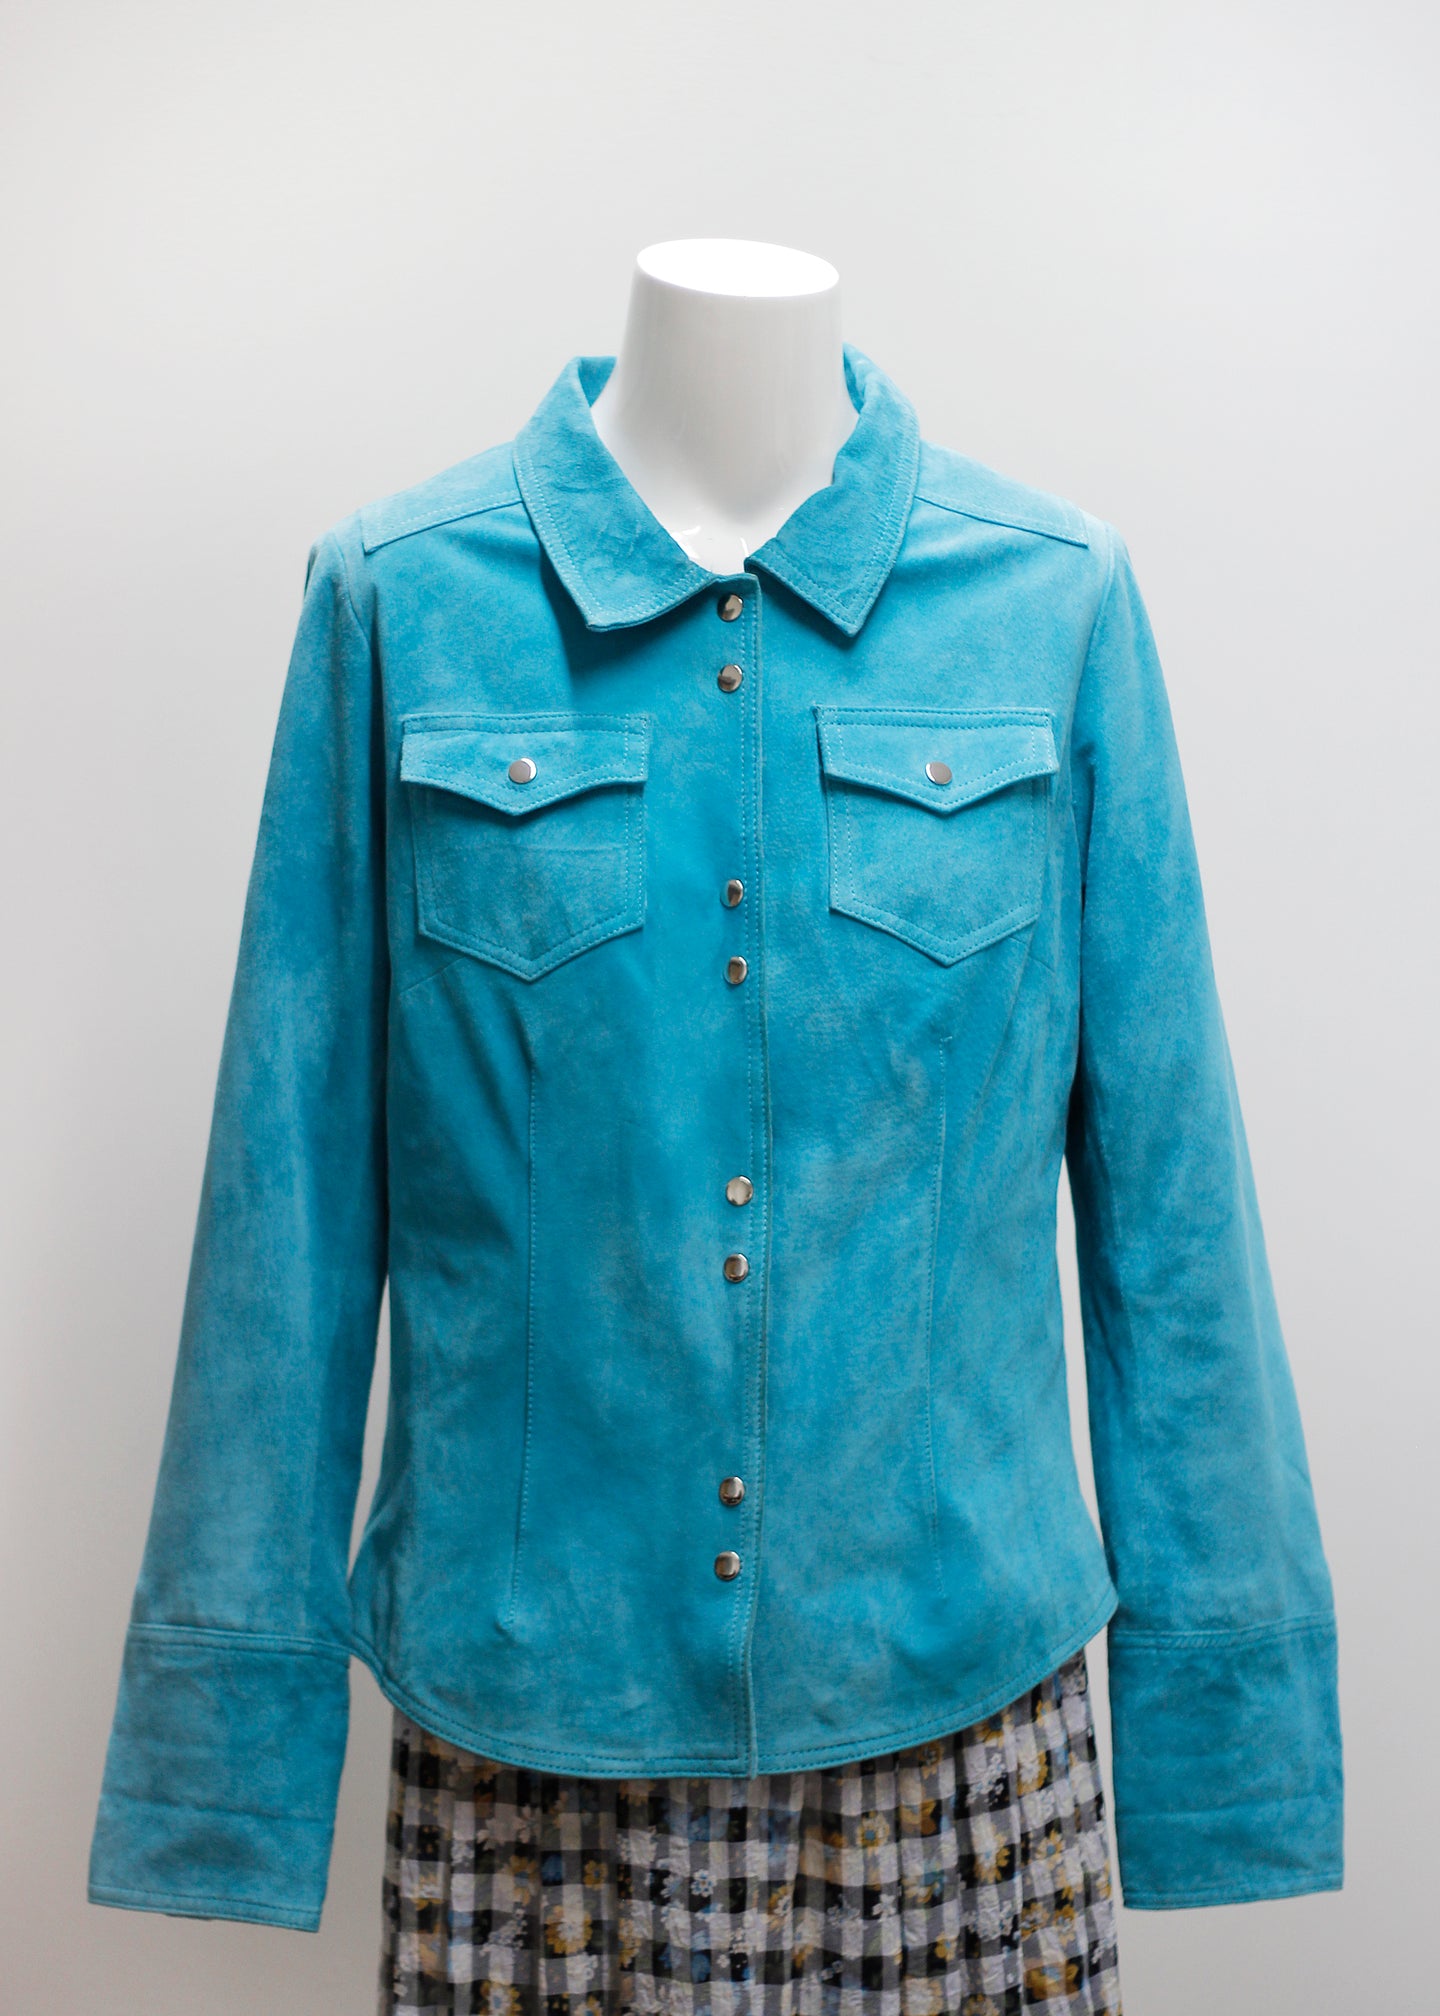 TURQUOISE SUEDE SHIRT